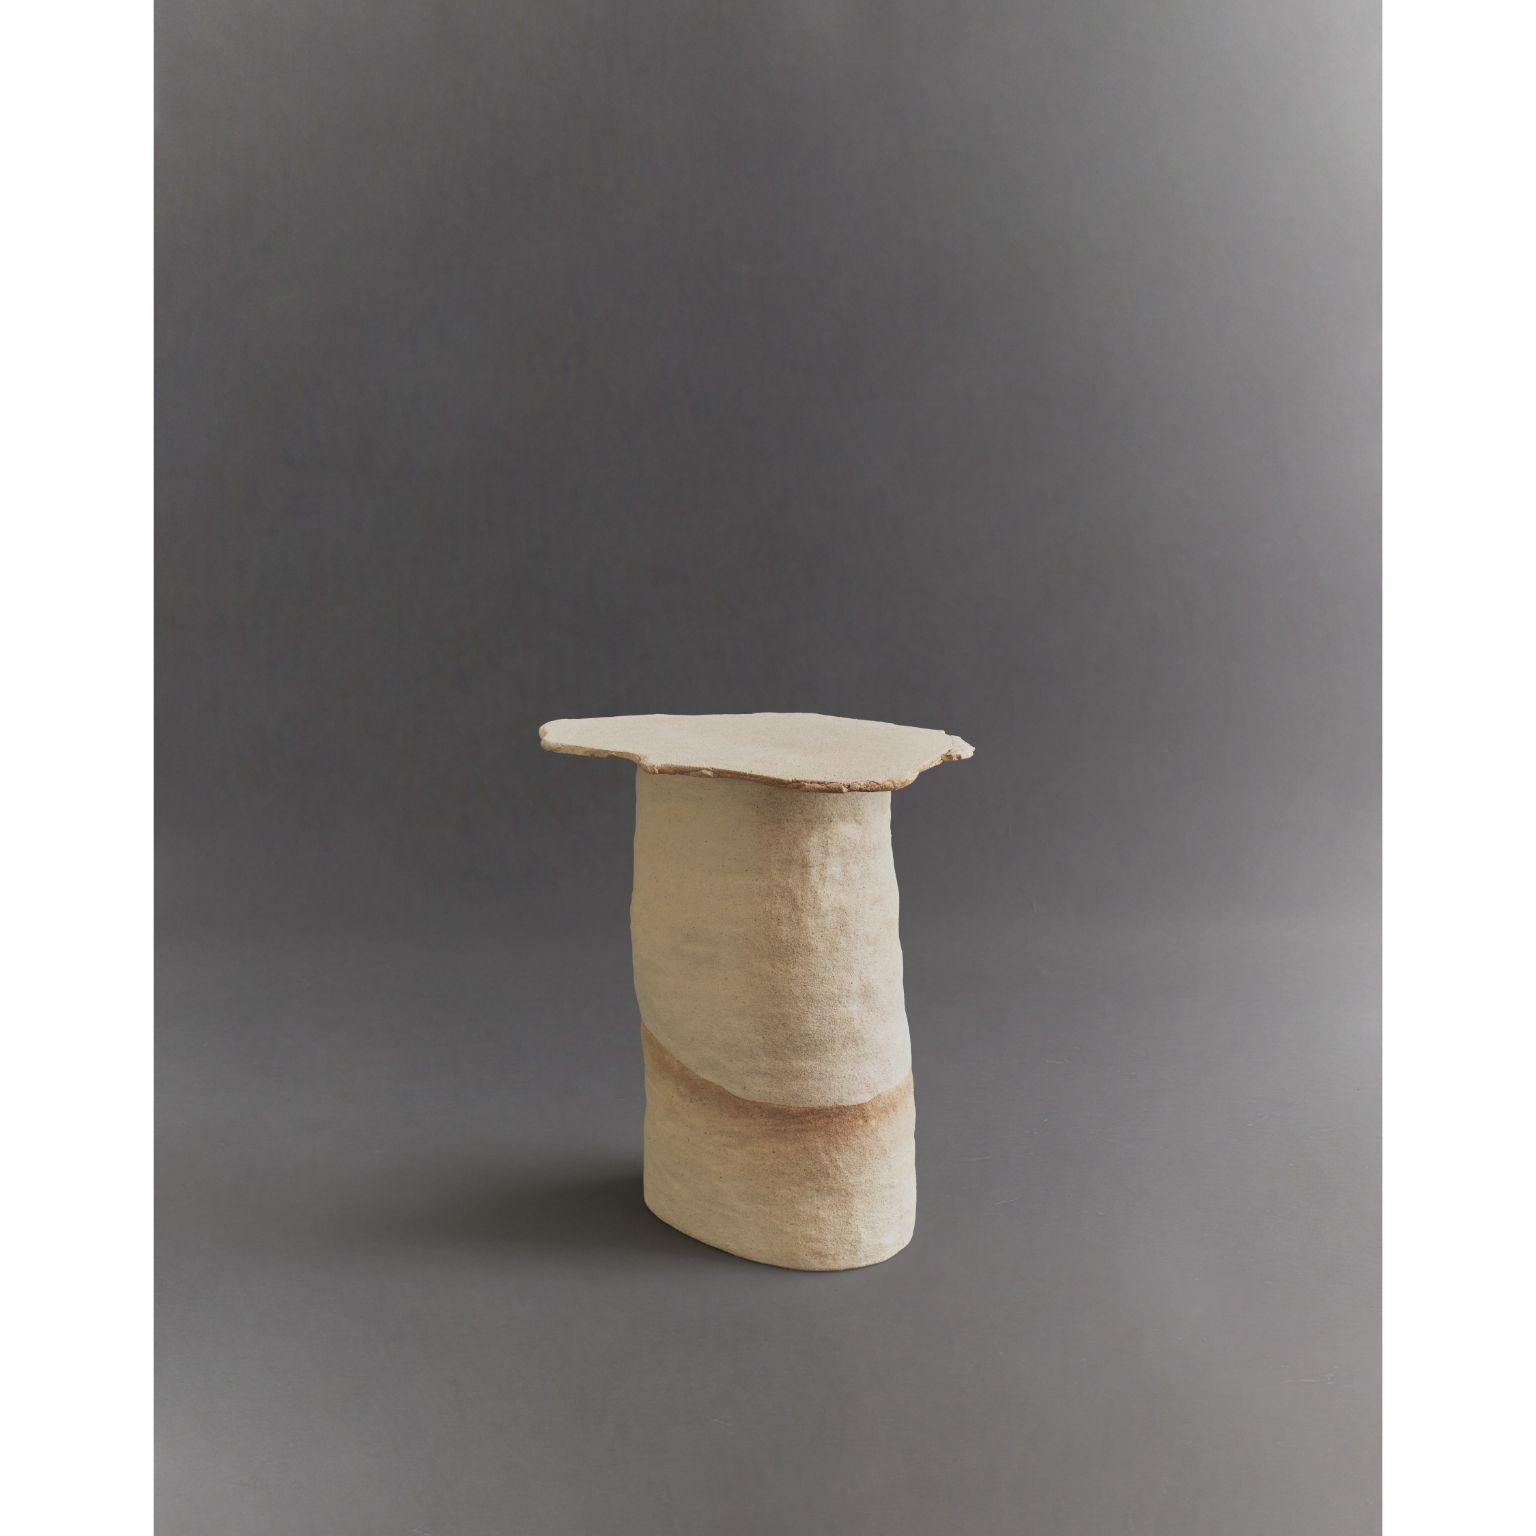 Arena clay side table by Ombia
Dimensions: W 36 x D 25.5 x H 48.5 cm
Materials: Clay, unglazed. 
Custom colors upon request.


Ombia is a ceramic sculpture and design studio based in Los Angeles. The name and its roots originates from